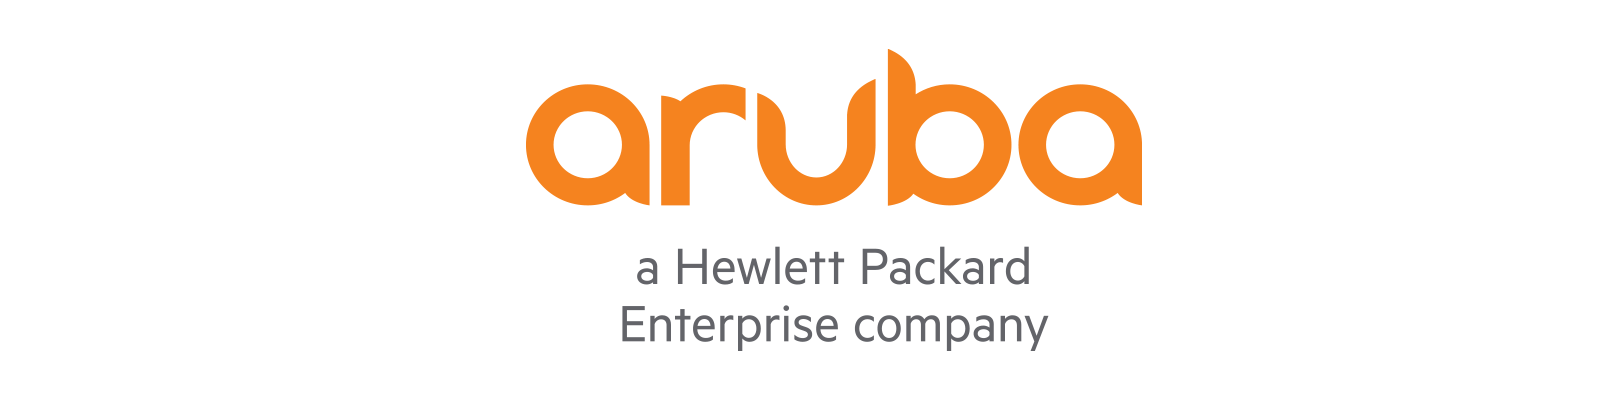 Clear HP Logo - Aruba | Enterprise Networking and Security Solutions